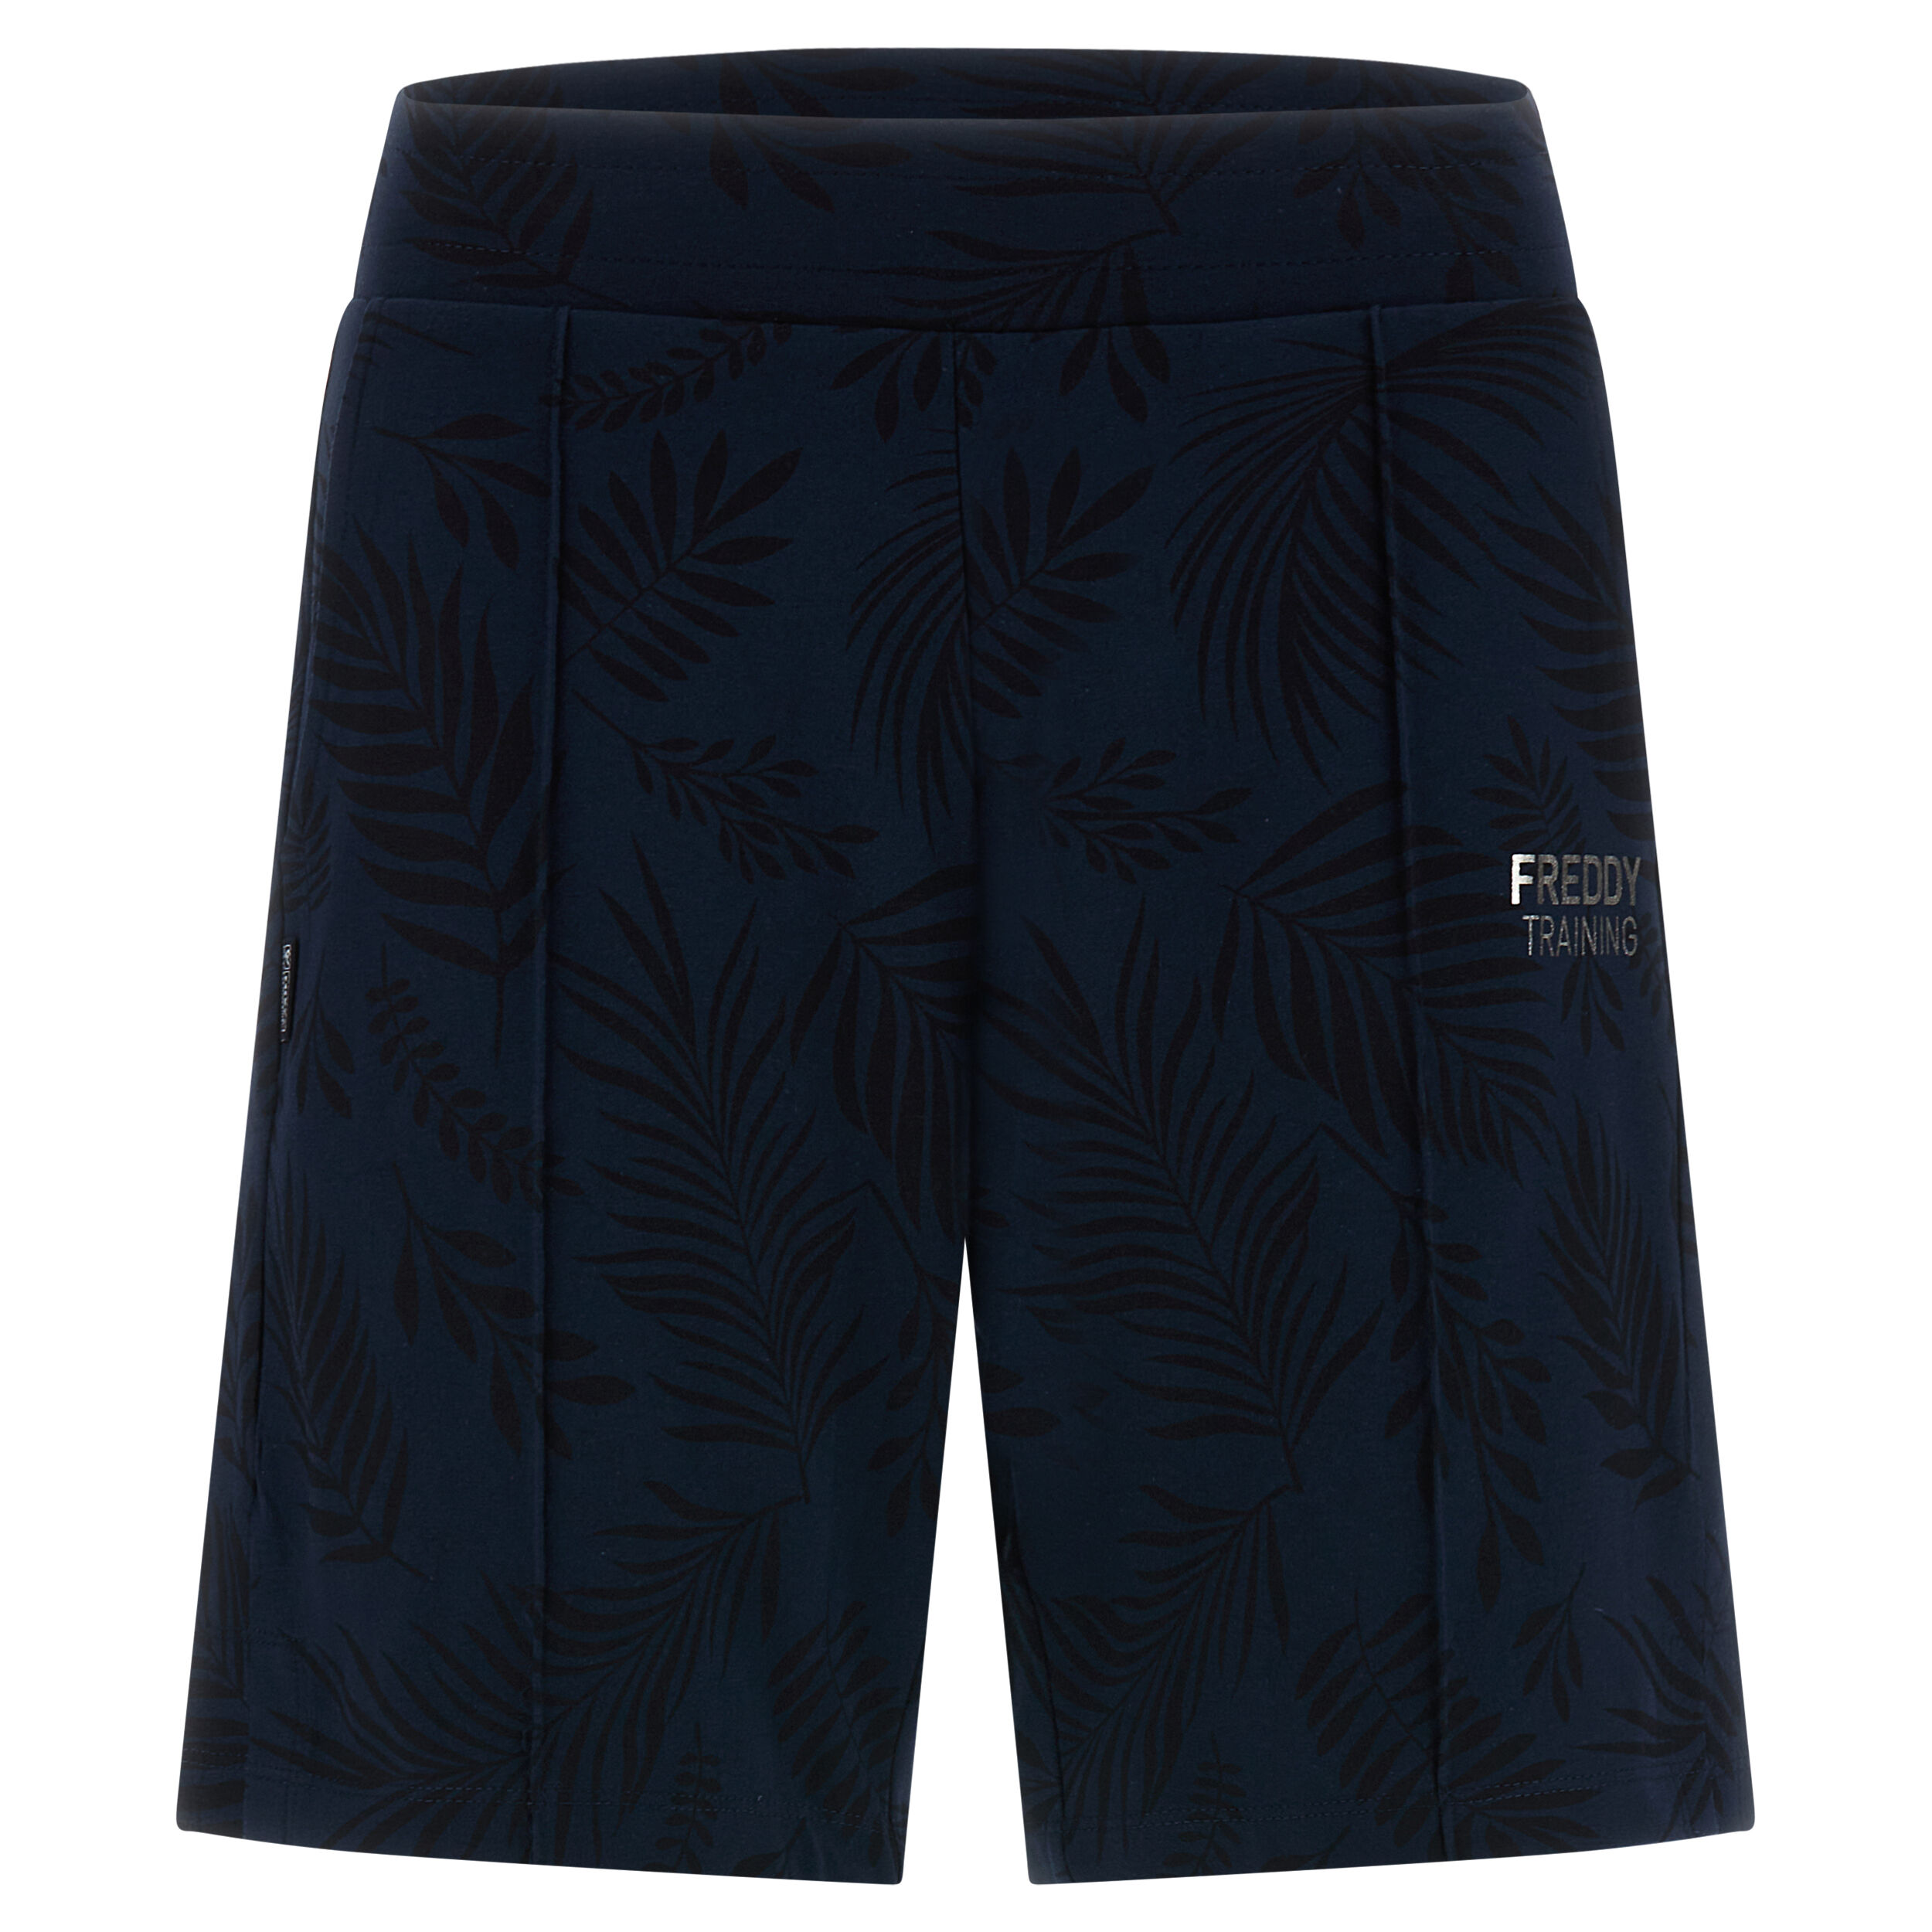 Freddy Pantaloncini in jersey stampa foliage tropicale all over Allover Leaves Blue Donna Small